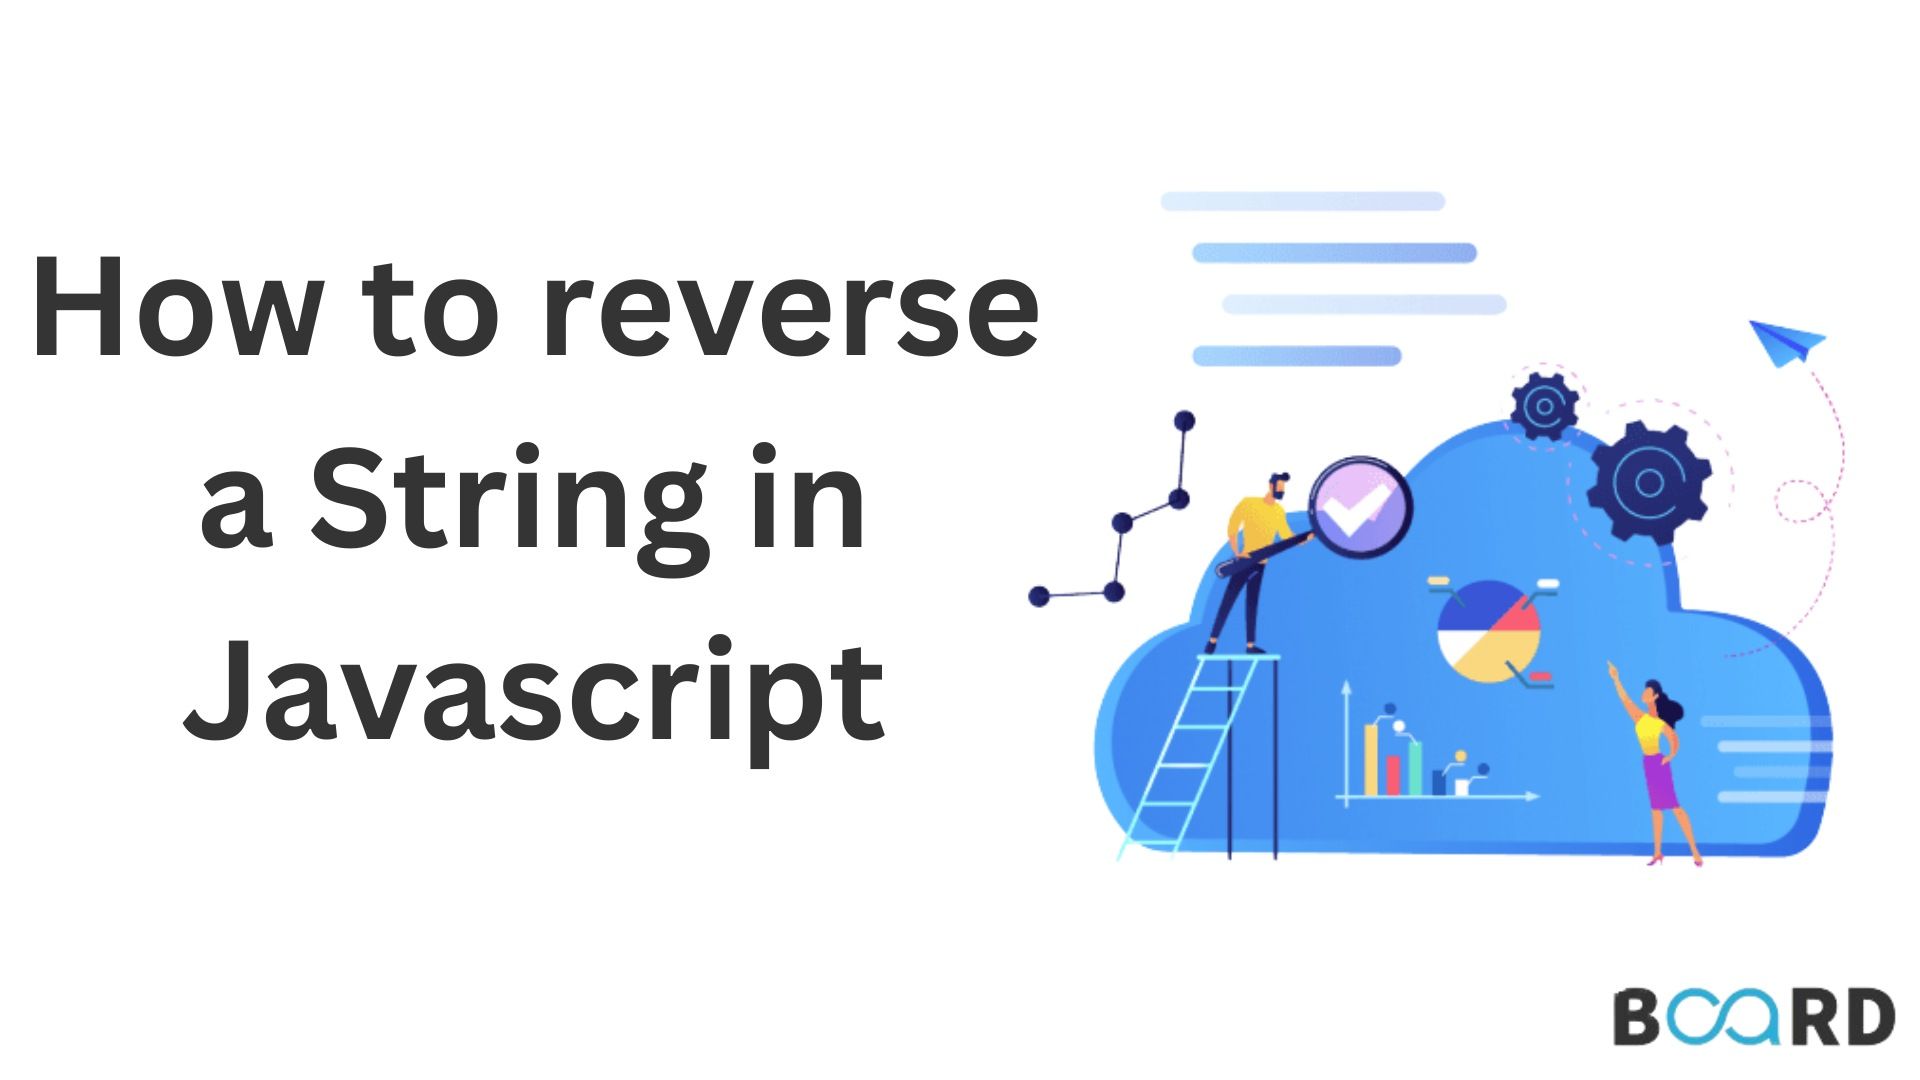 How to reverse a string in Javascript?